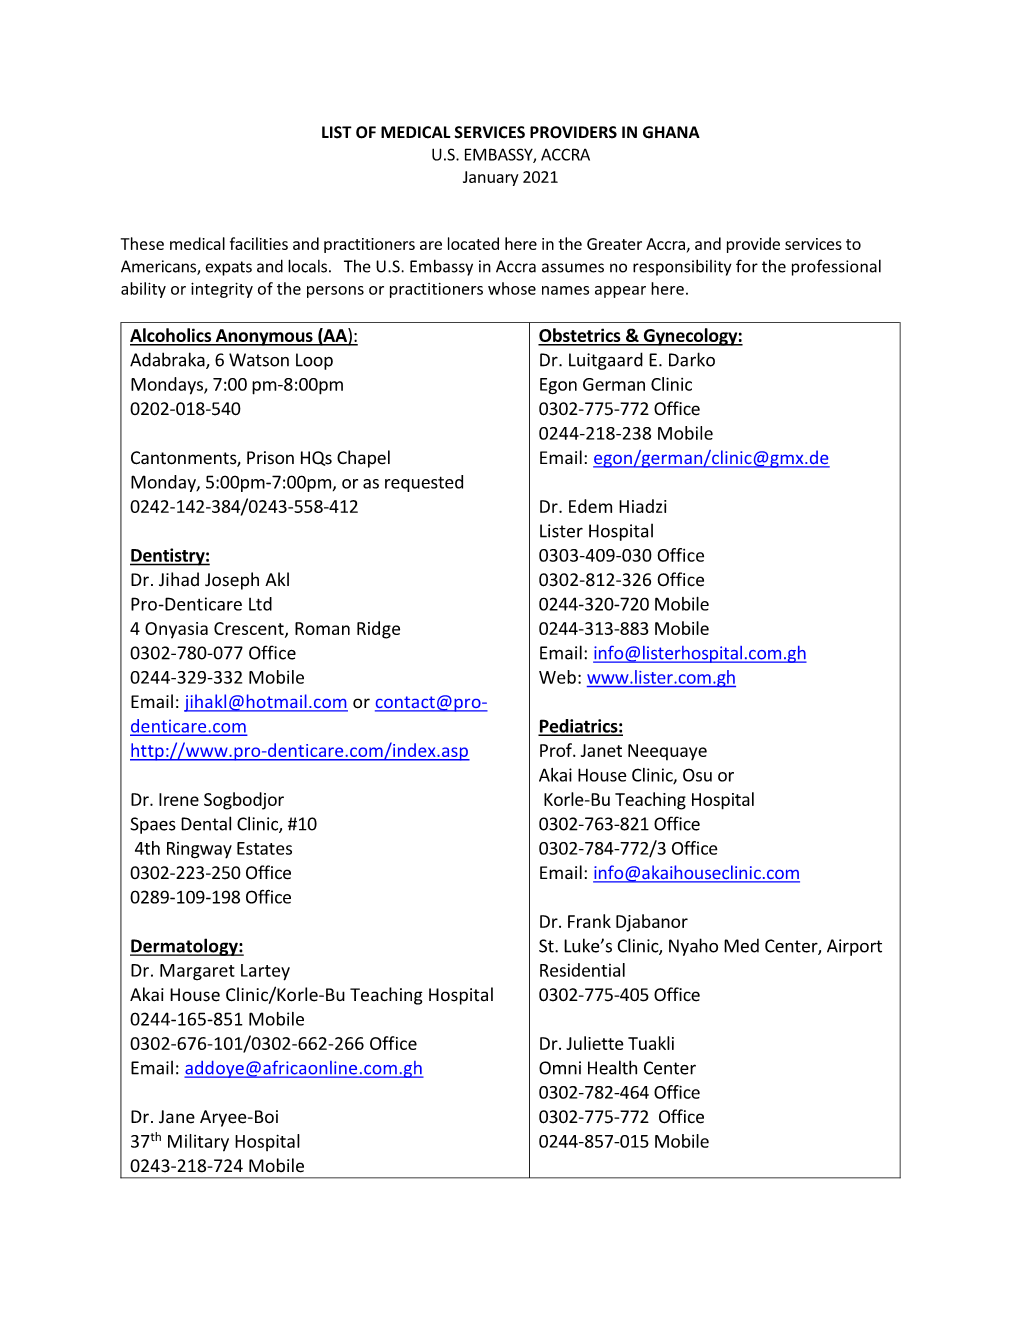 List of Medical Services Providers.(PDF)